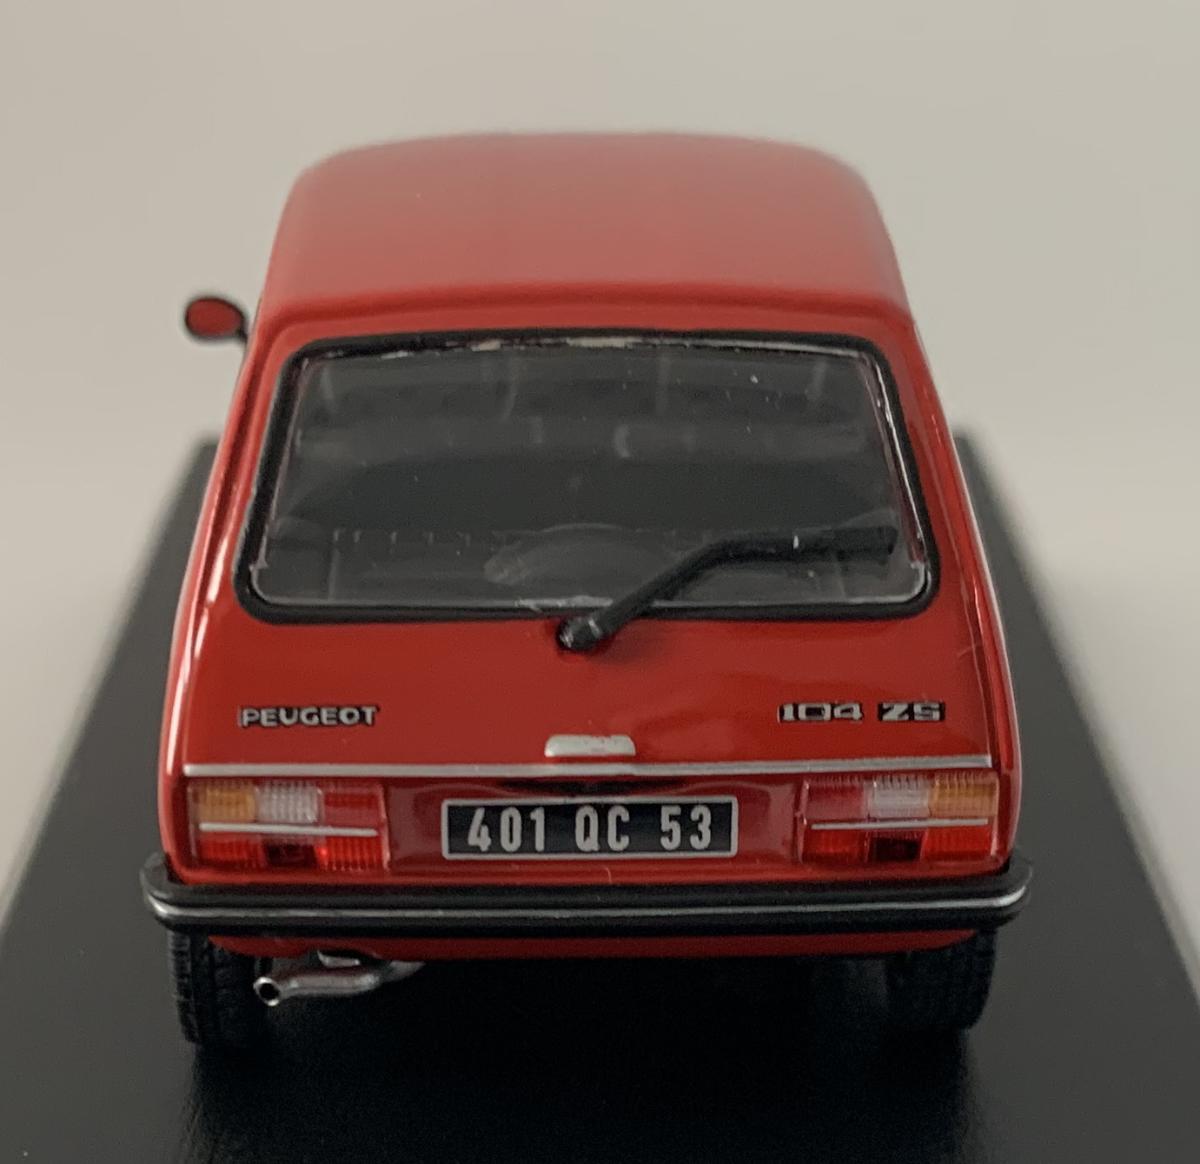 An excellent reproduction of the Peugeot 104 ZS with detail throughout, all authentically recreated. Model is mounted on a removable plinth with a removable hard plastic cover